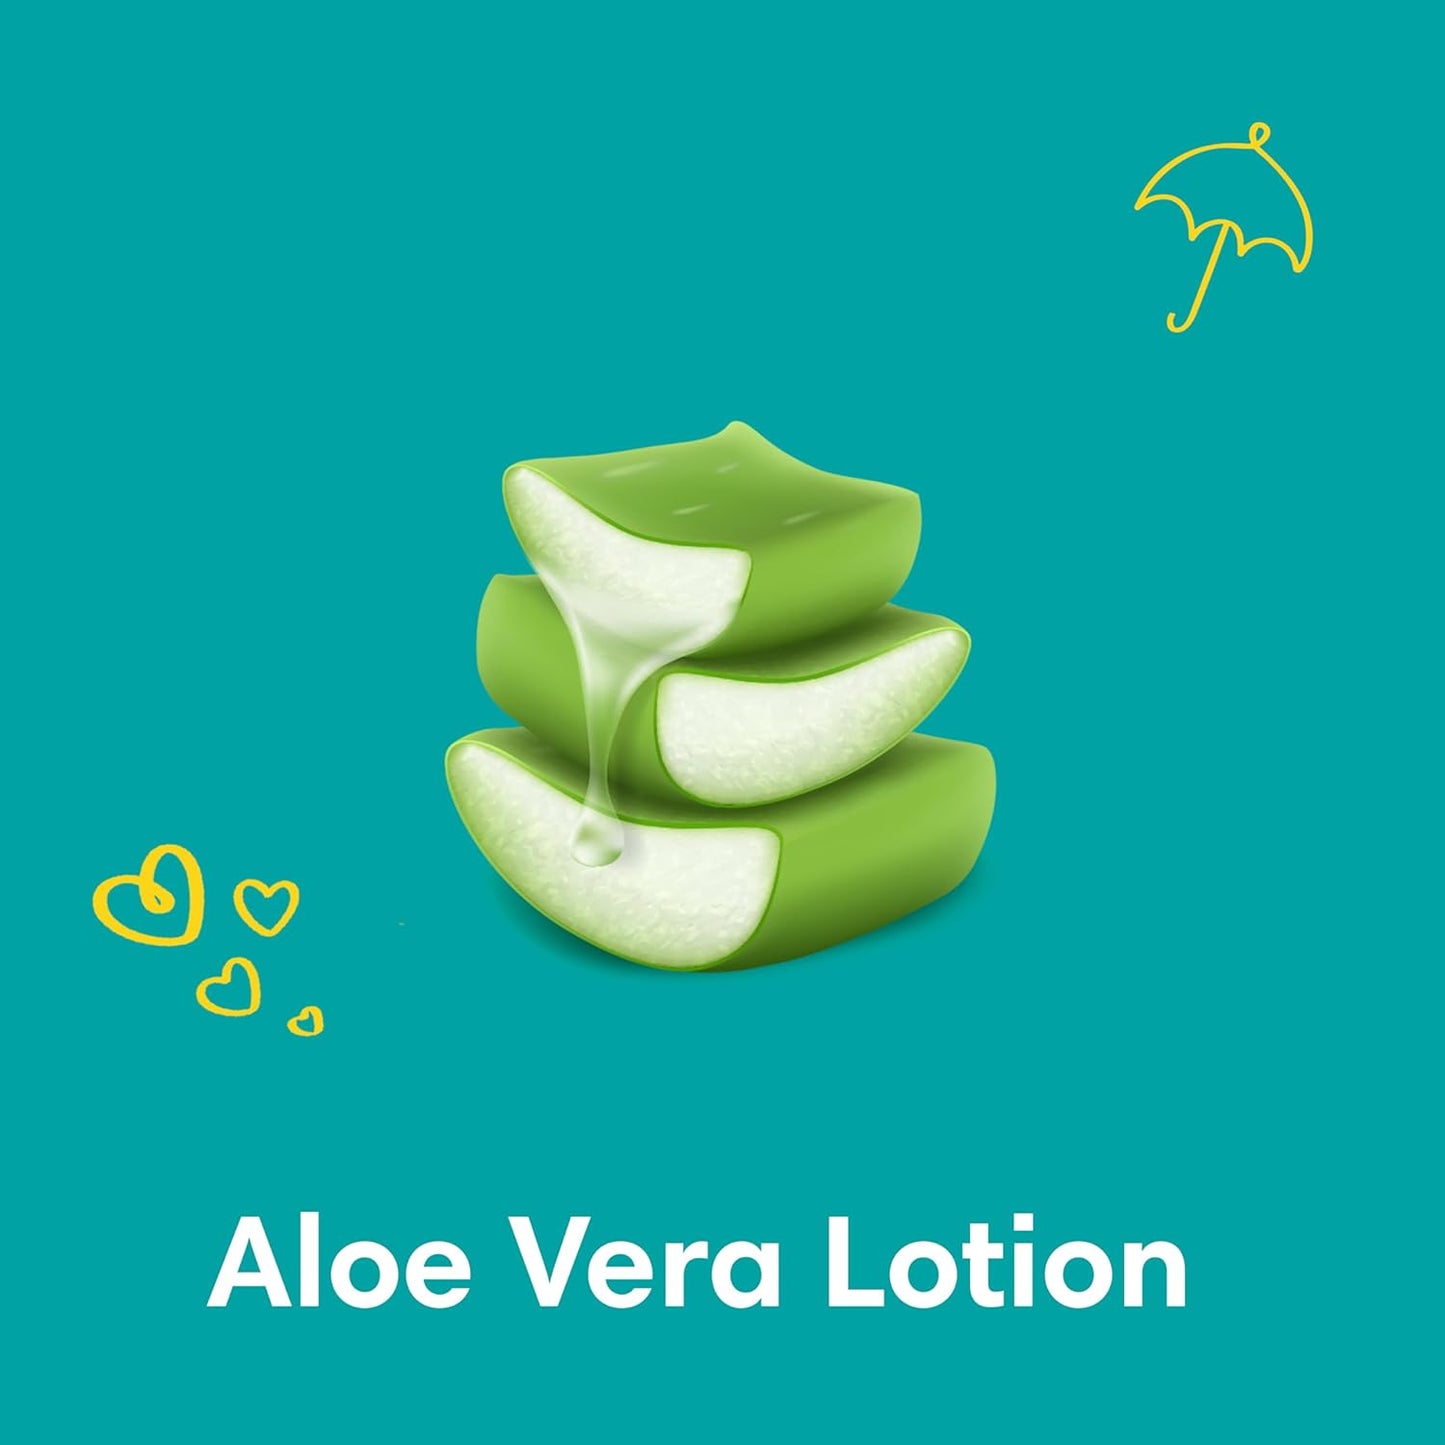 Pampers Baby-Dry Taped Diapers with Aloe Vera Lotion, up to 100% Leakage Protection, Size 4, 9-14kg, 76 Count - Laadlee